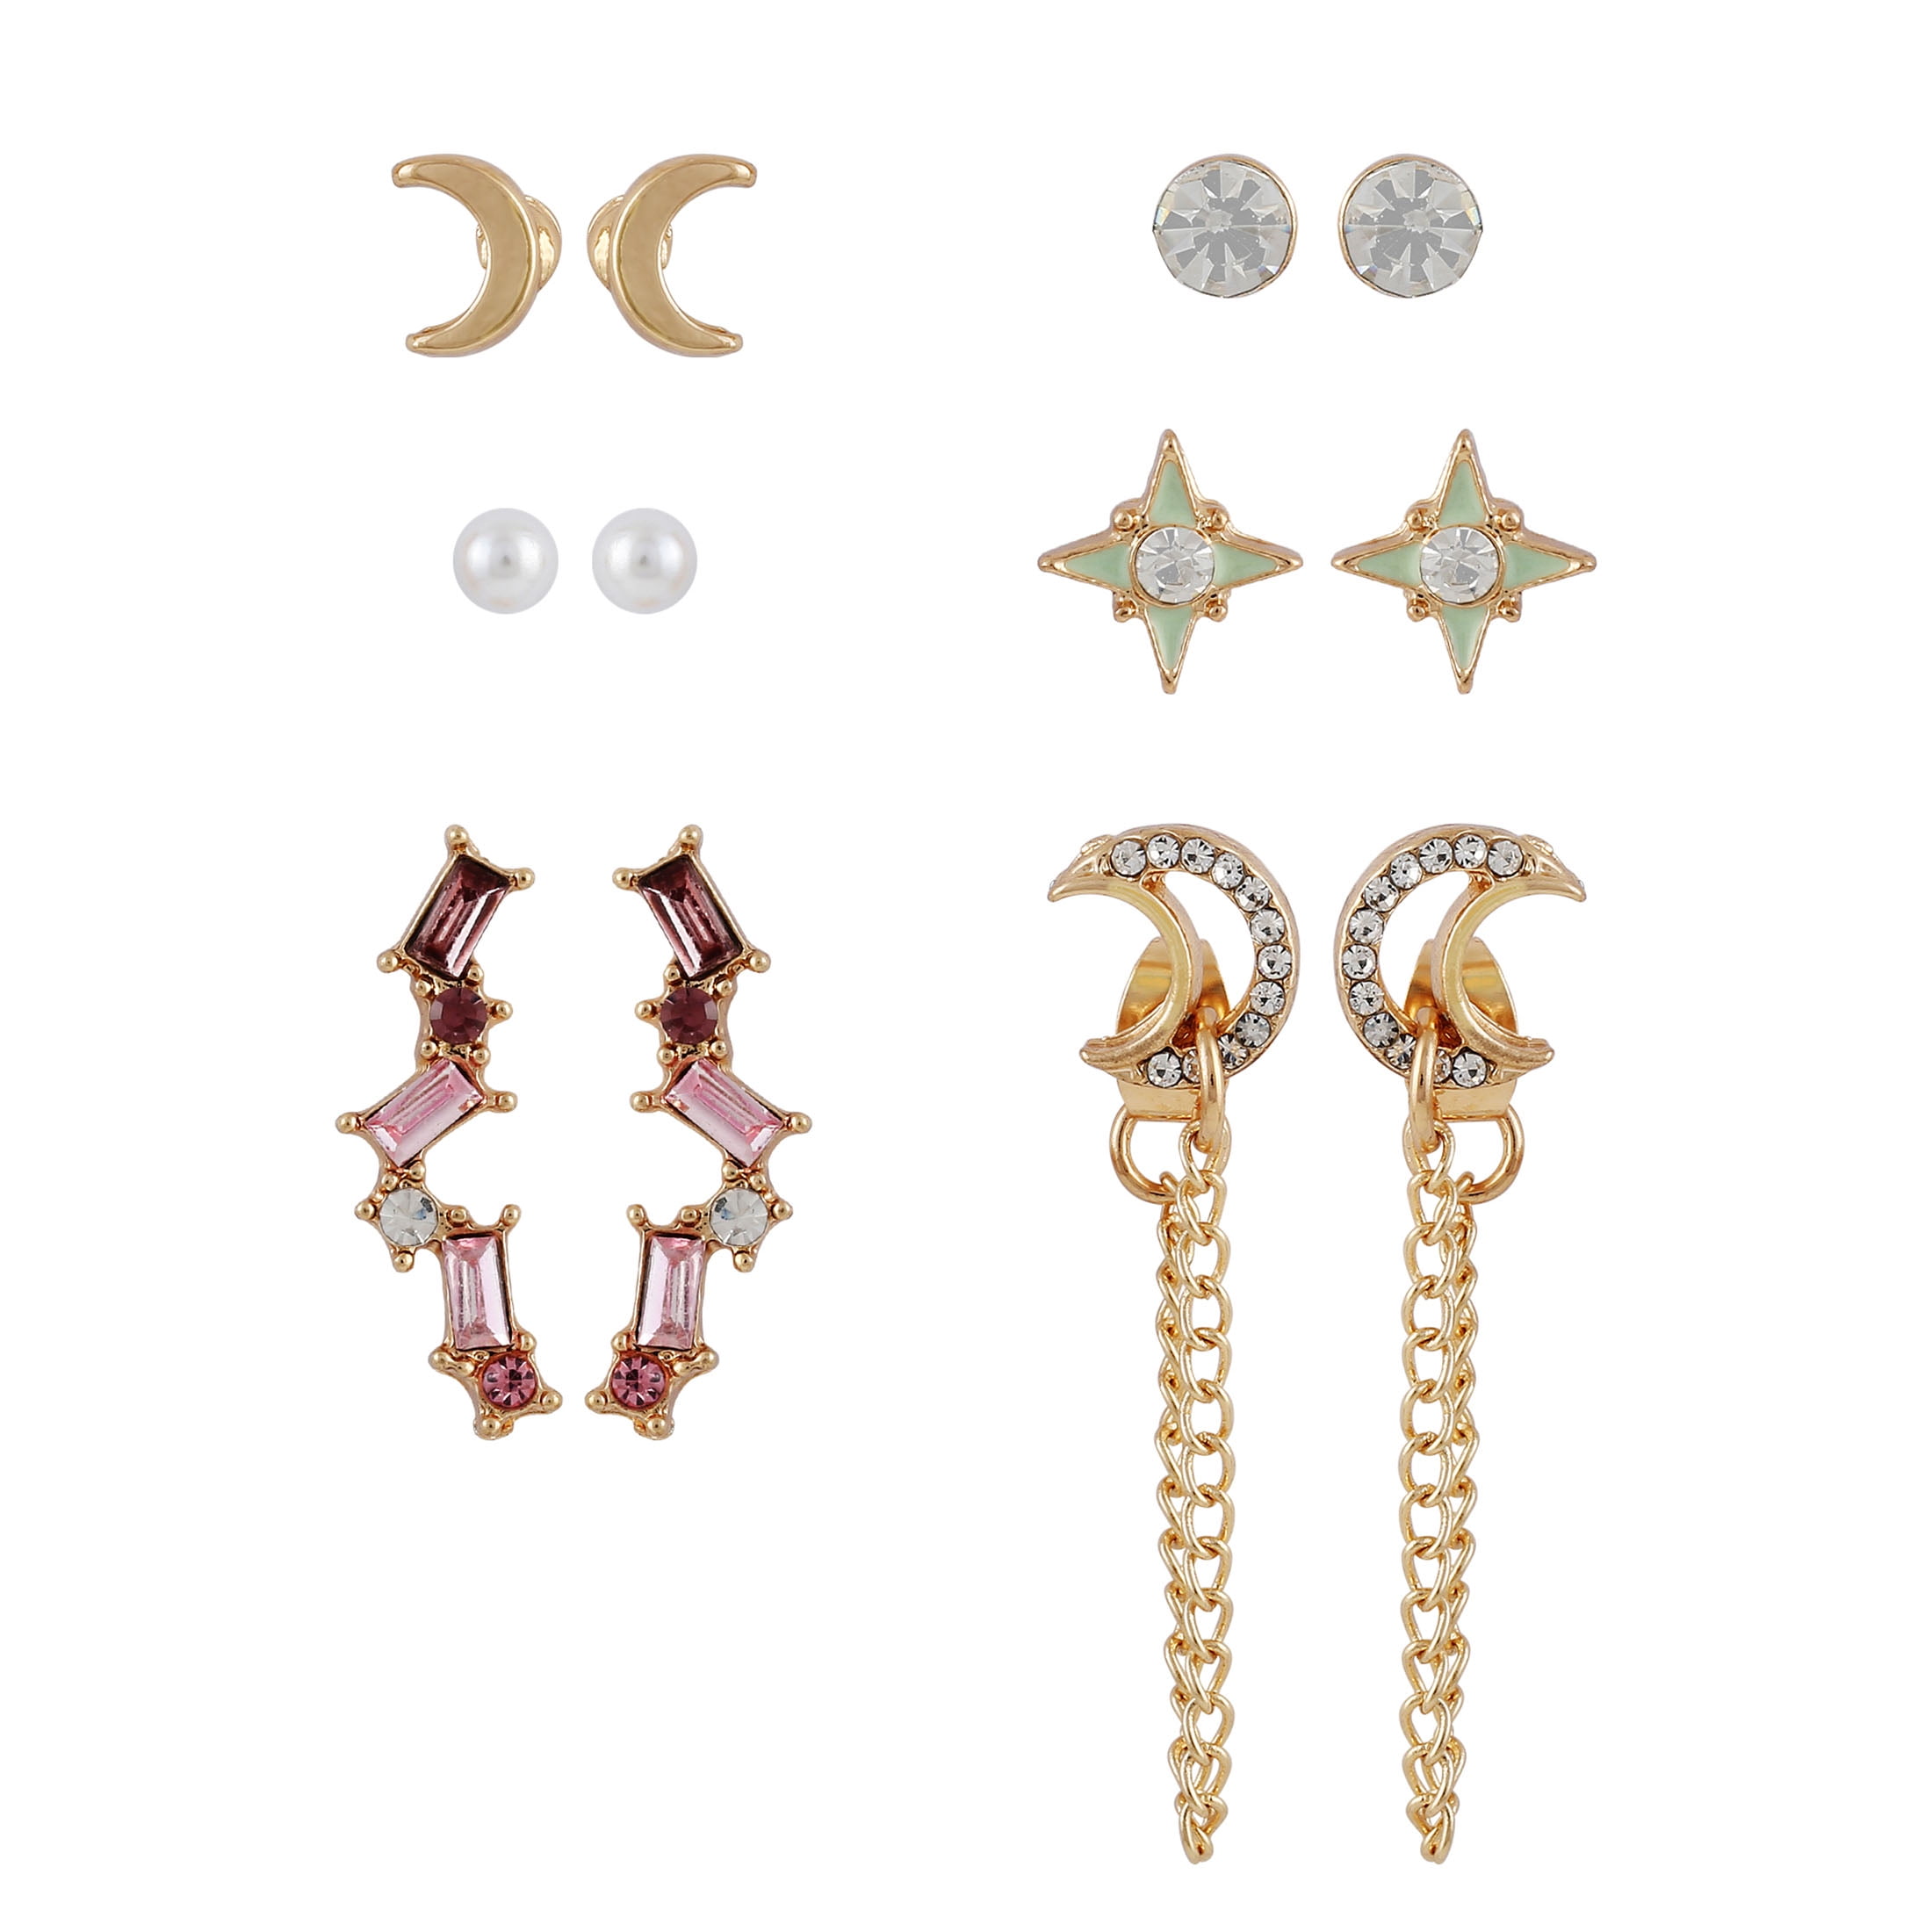 Time and Tru Women's Celestial Theme 6 on Post Earring Set in Imitation Gold Plating.